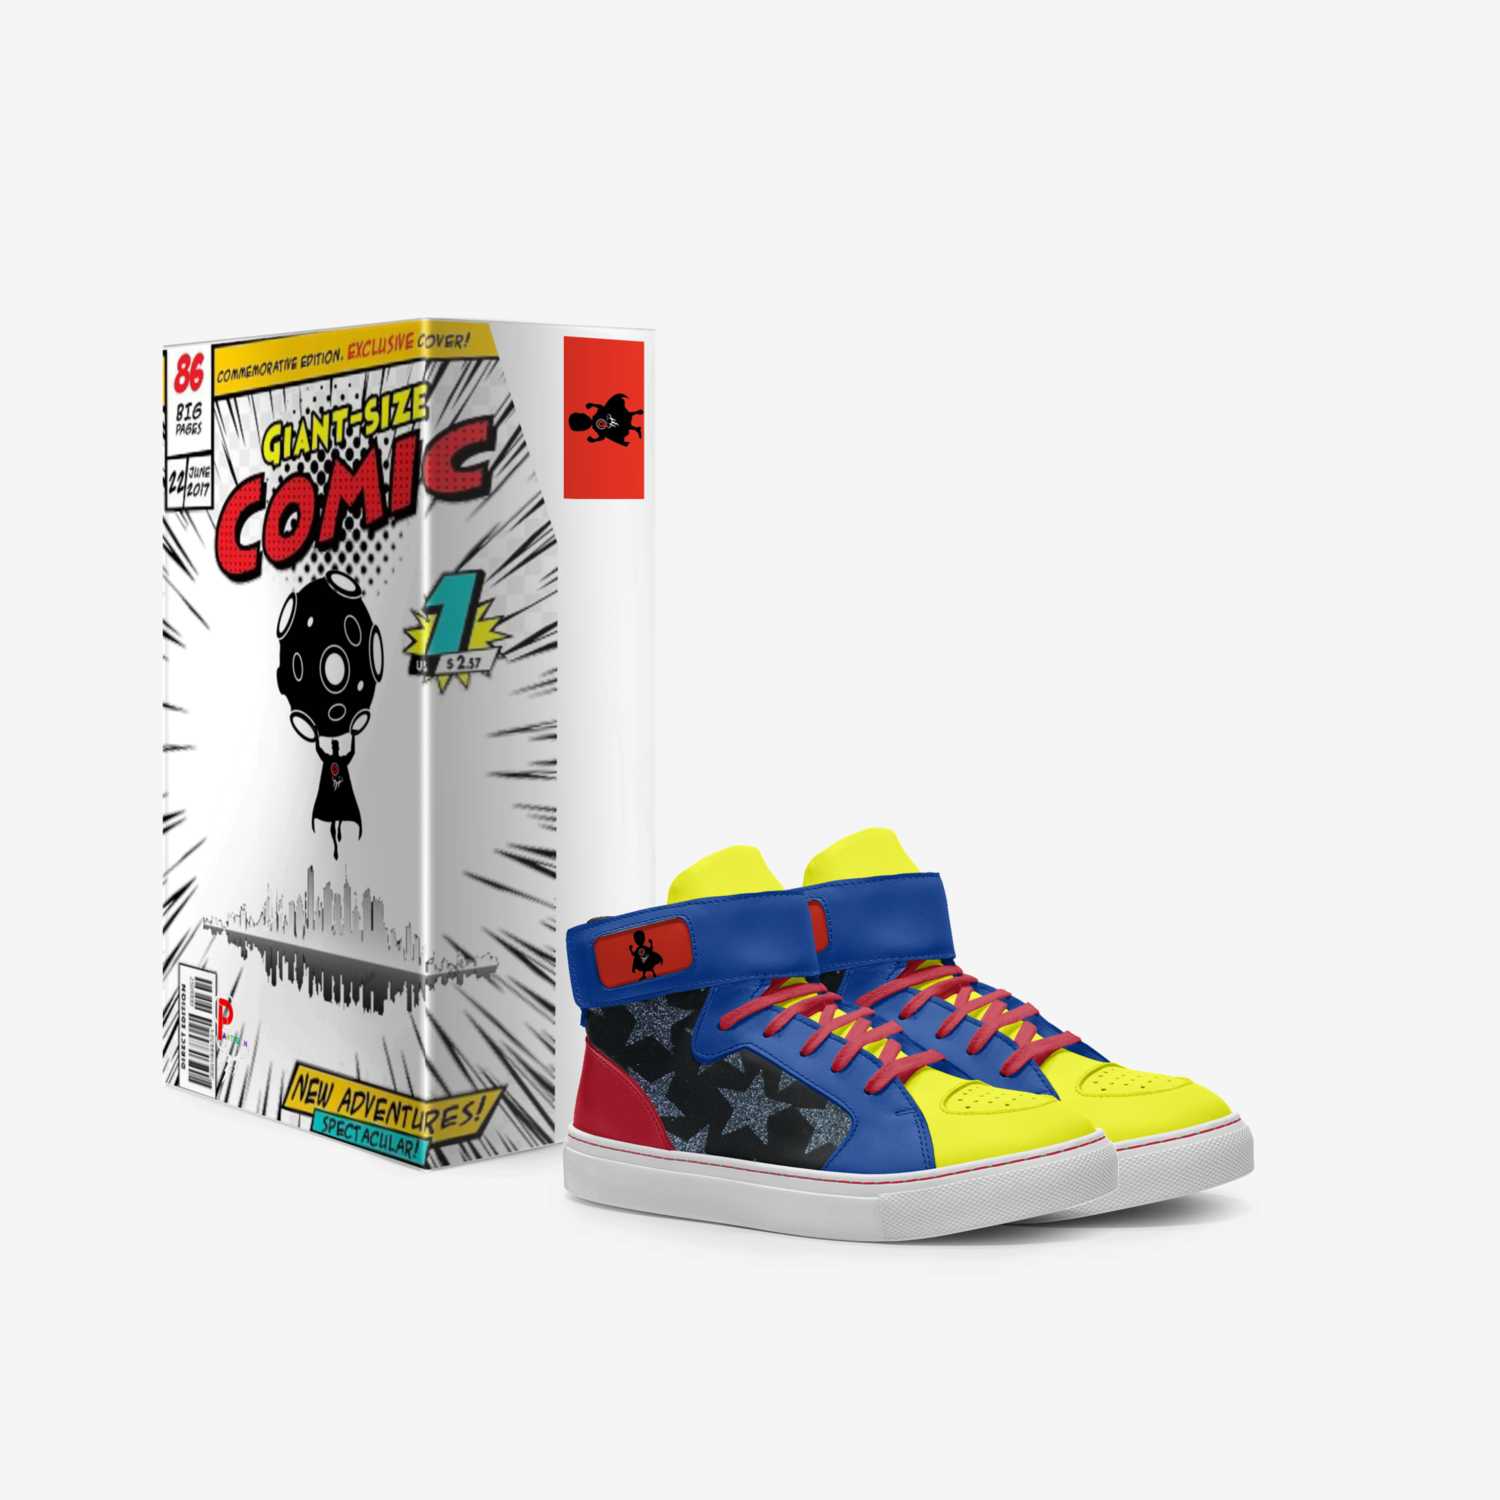 UP UP AND AWAY custom made in Italy shoes by Rafael Rivera | Box view